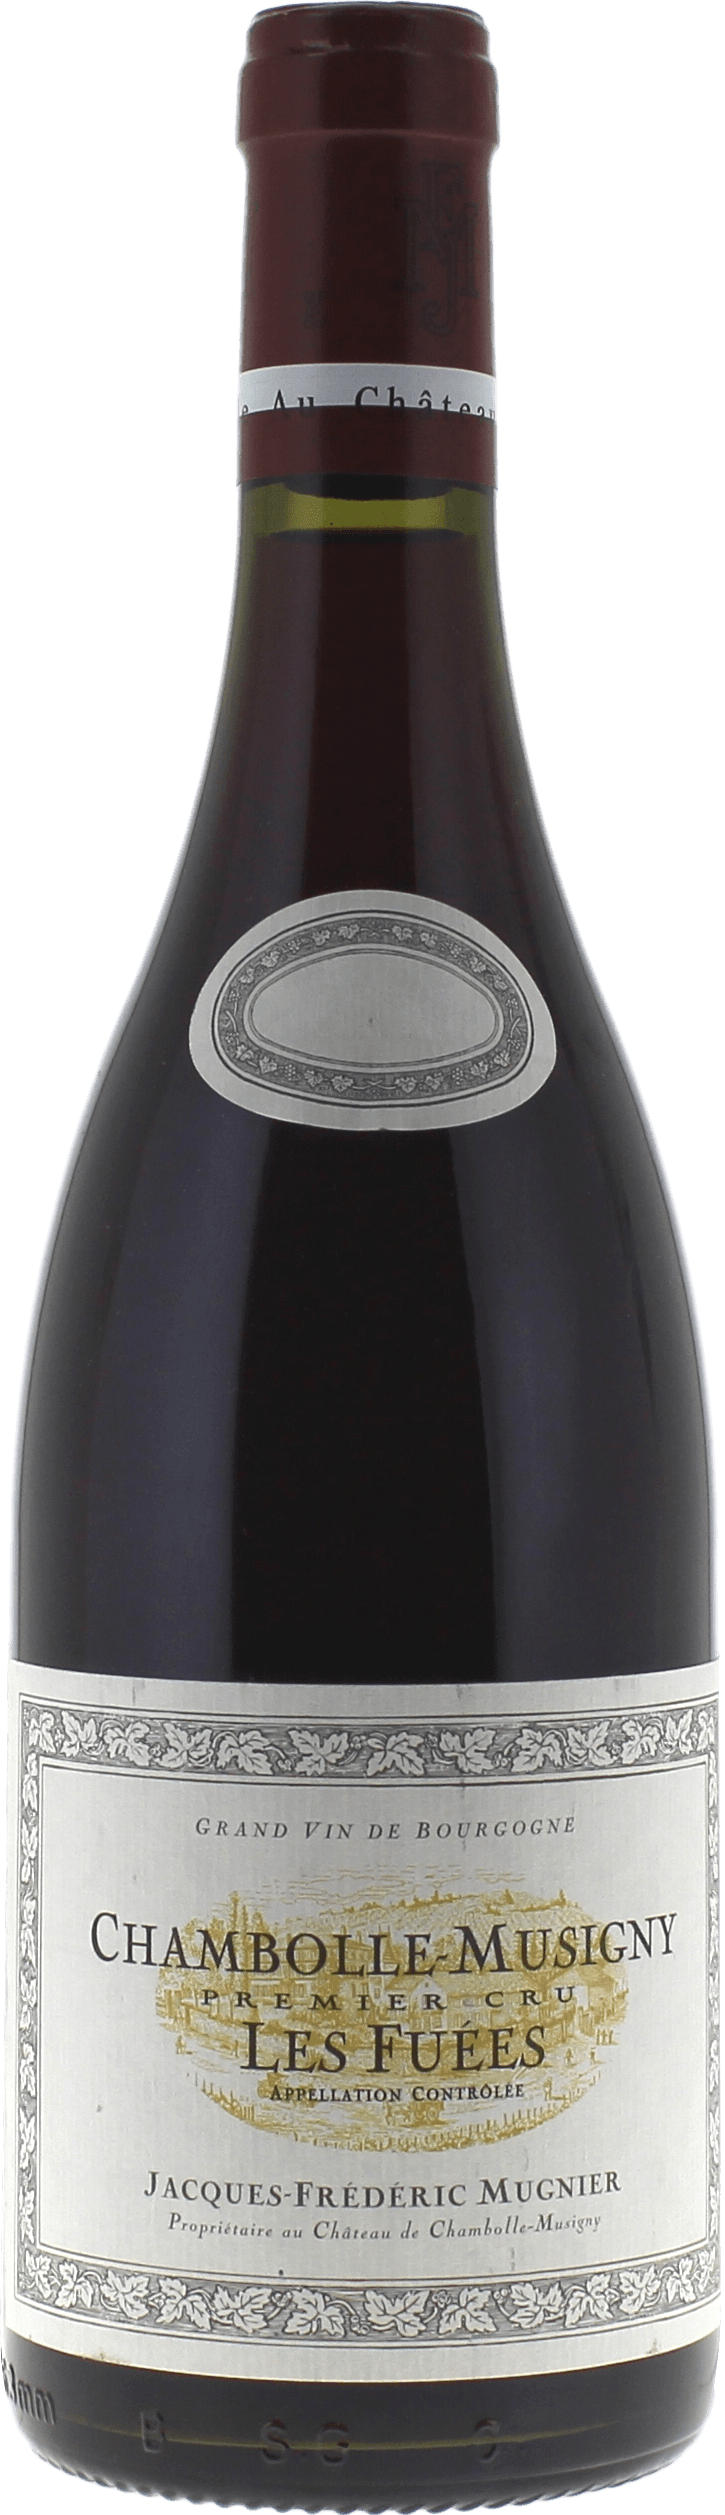 Chambolle musigny 1er cru les fues 2014 Domaine MUGNIER Jacques Frederic, Bourgogne rouge